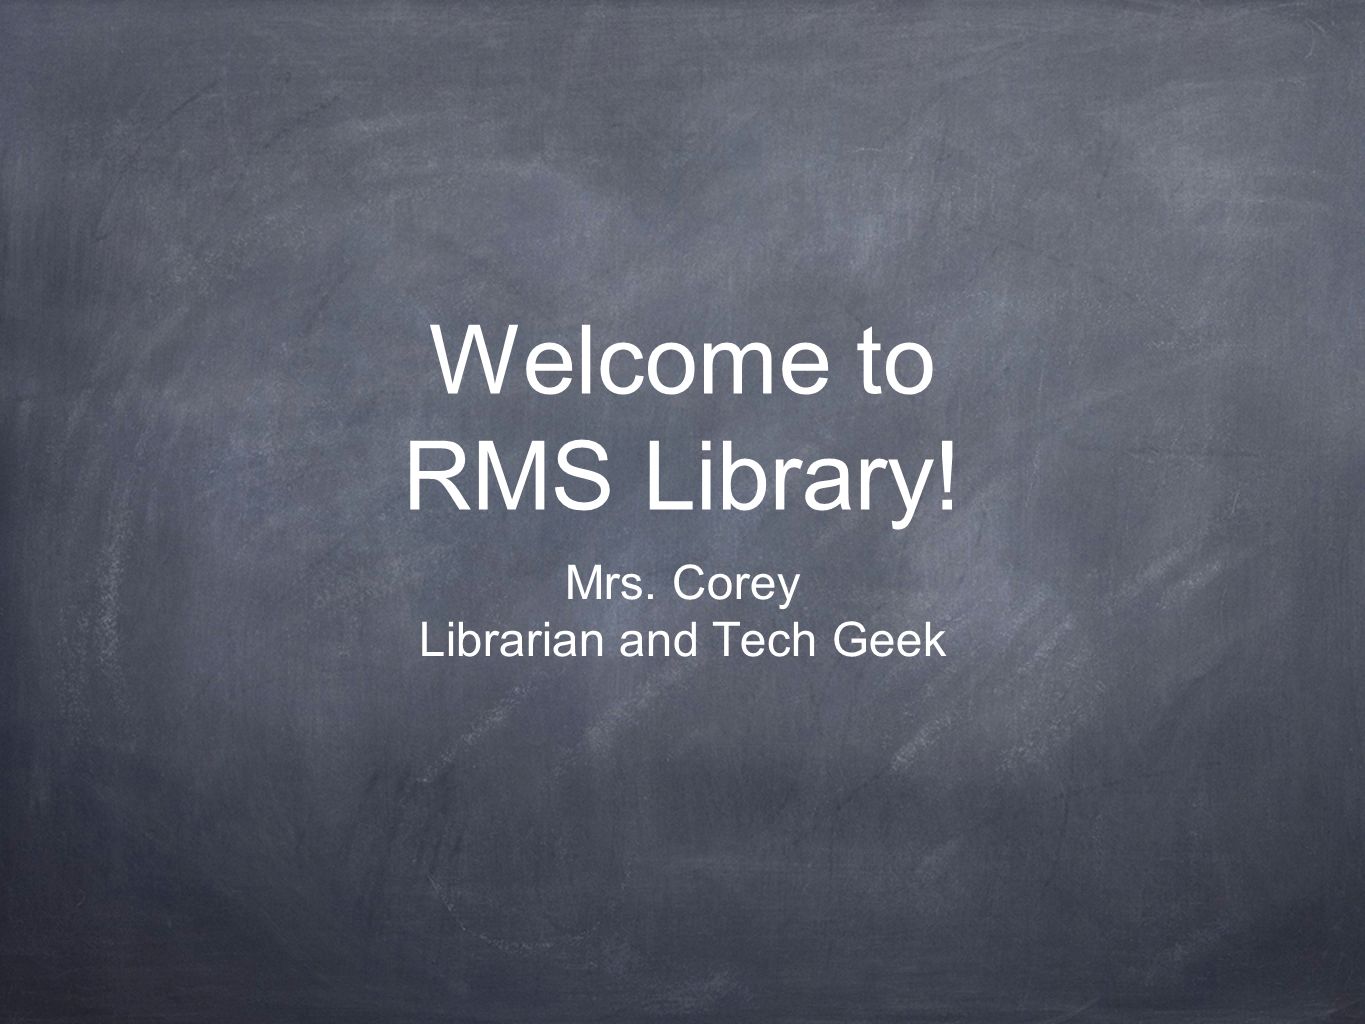 Welcome to RMS Library! Mrs. Corey Librarian and Tech Geek